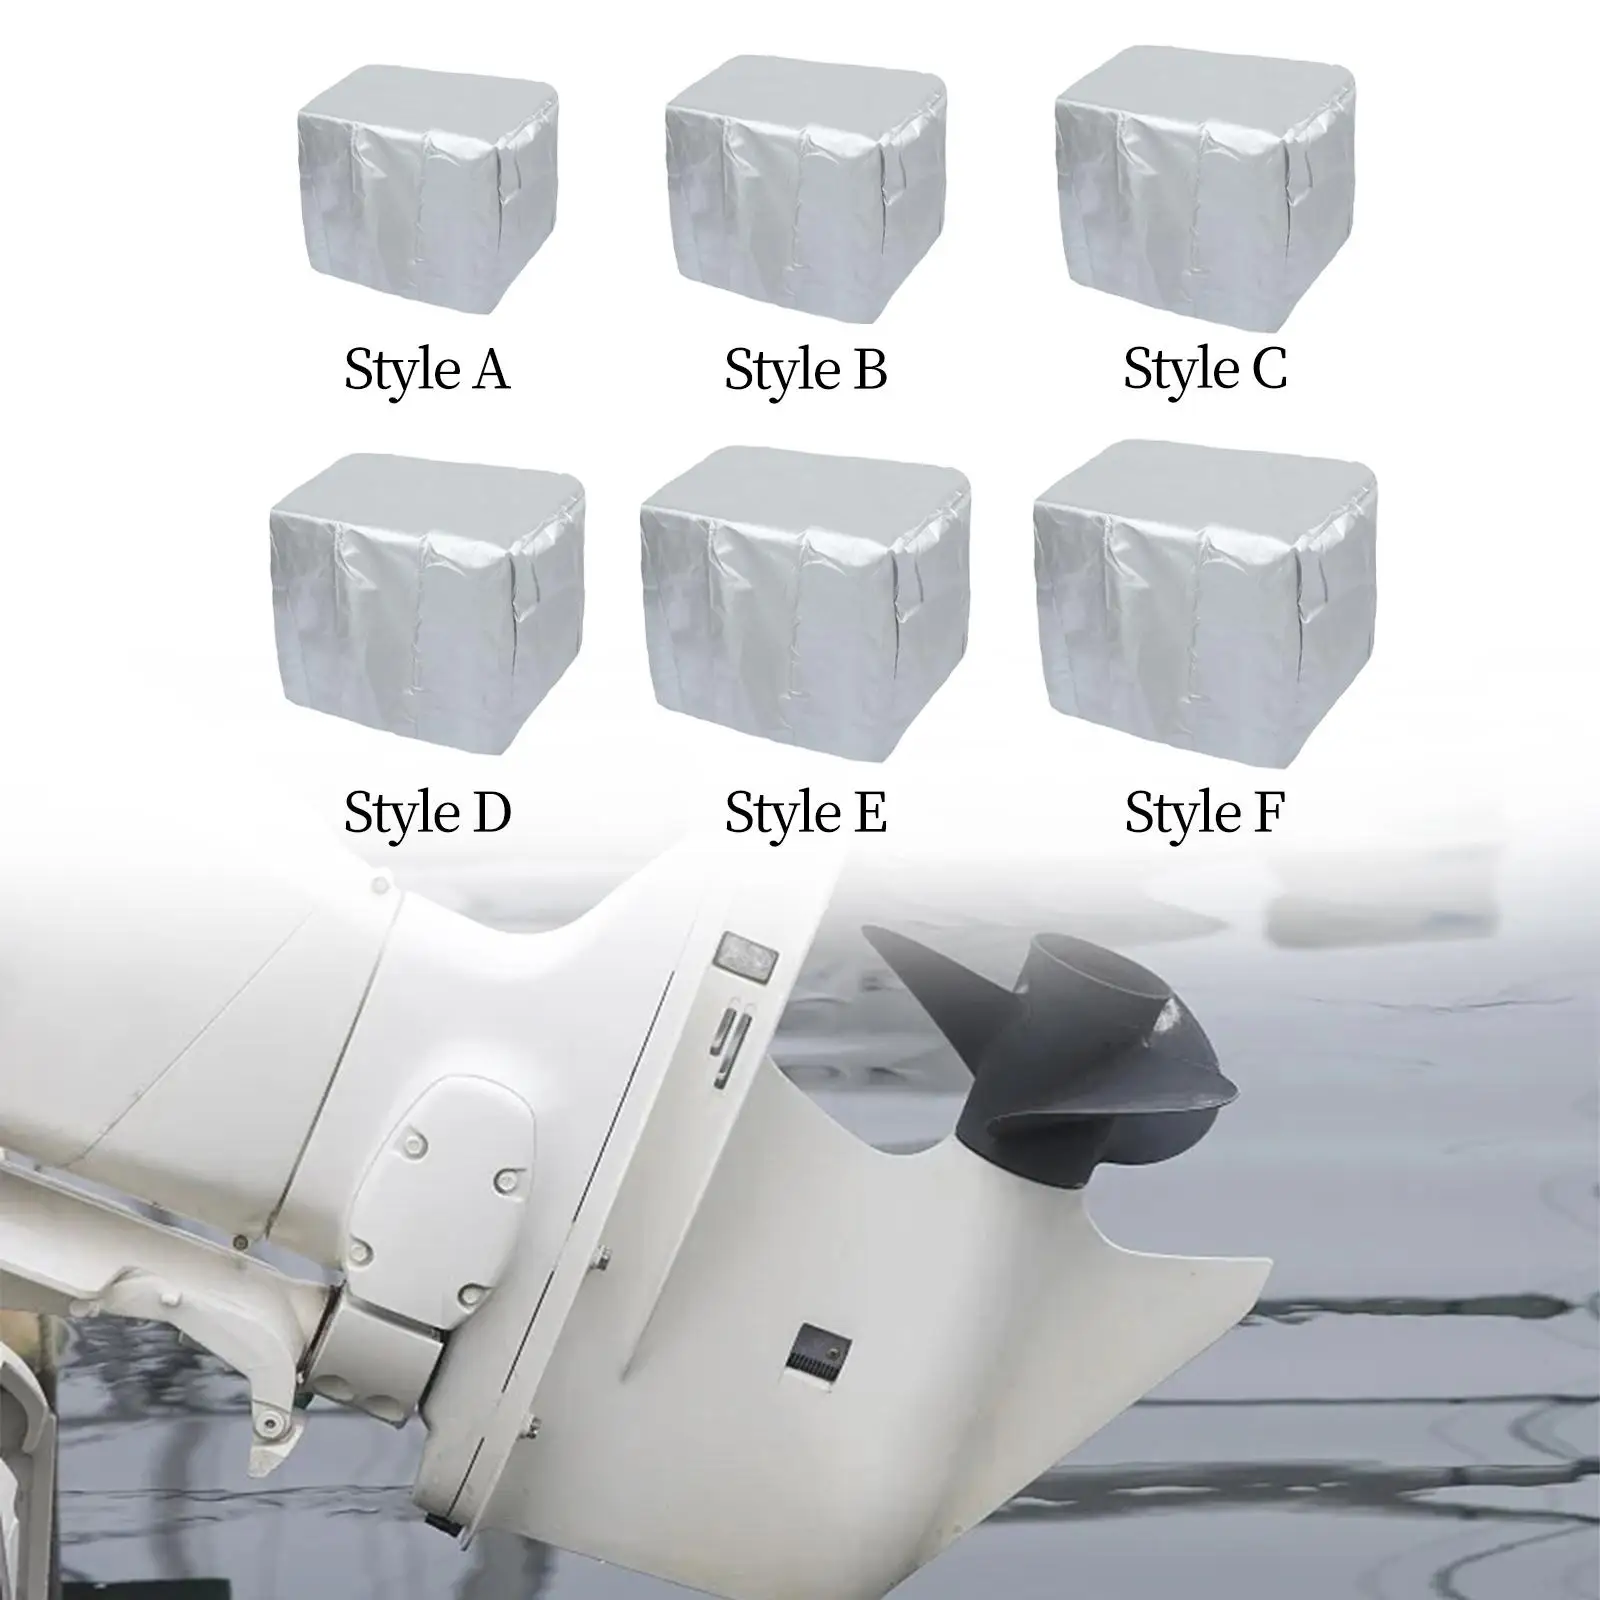 Boat Motor Covers Sunproof Yacht 210D Oxford Fabric Waterproof Dust Rain Protection Engine Protector Half Outboard Engine Cover